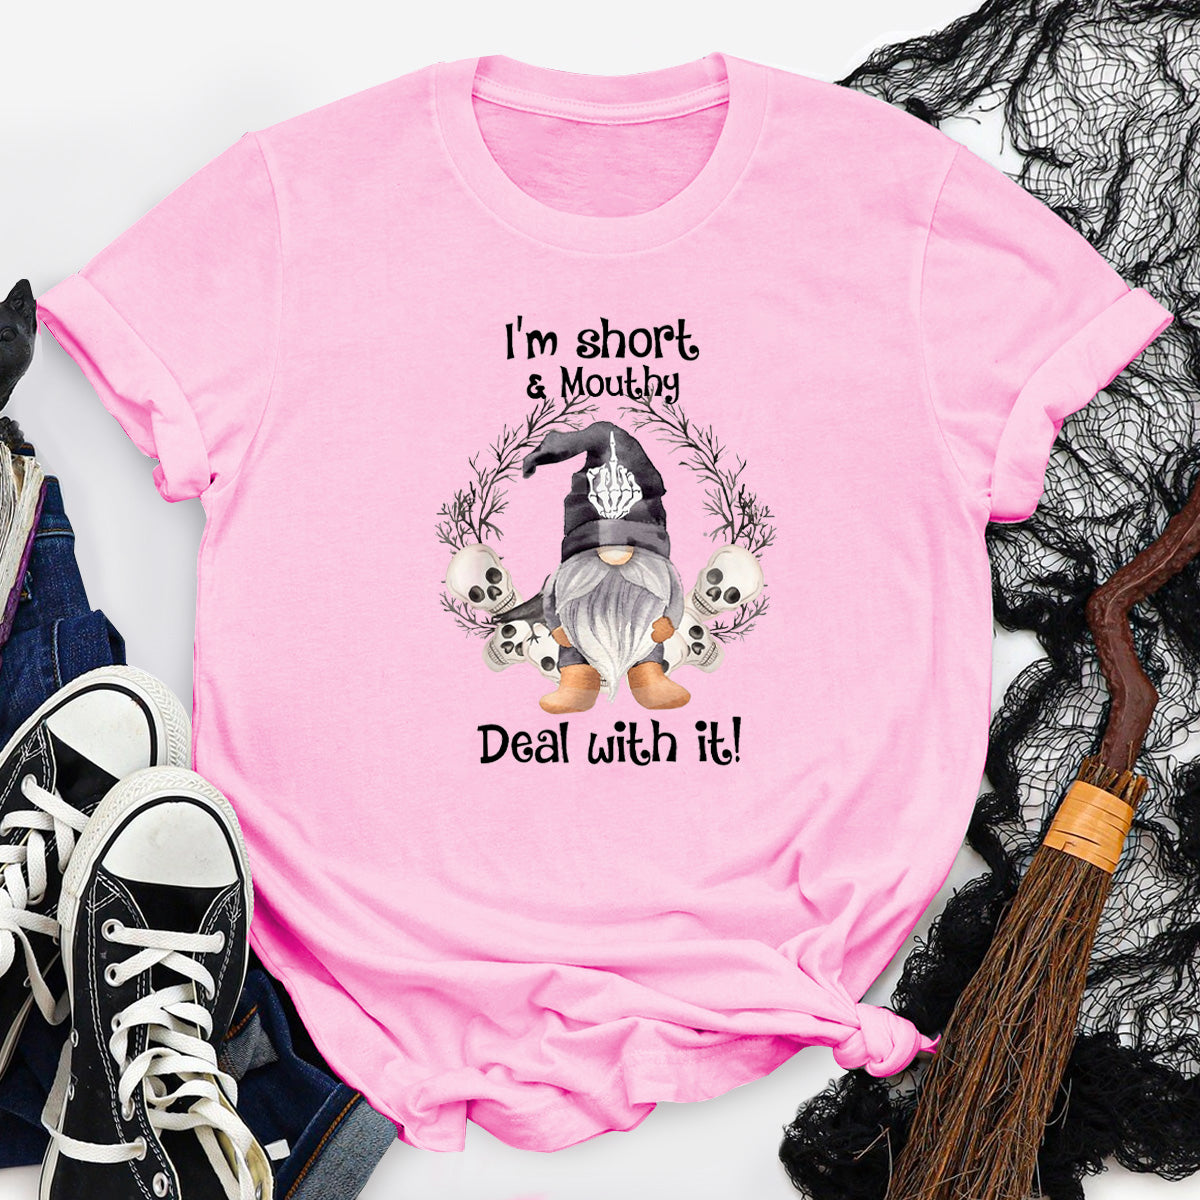 I'm Short And Mouthy Deal With It T-Shirt